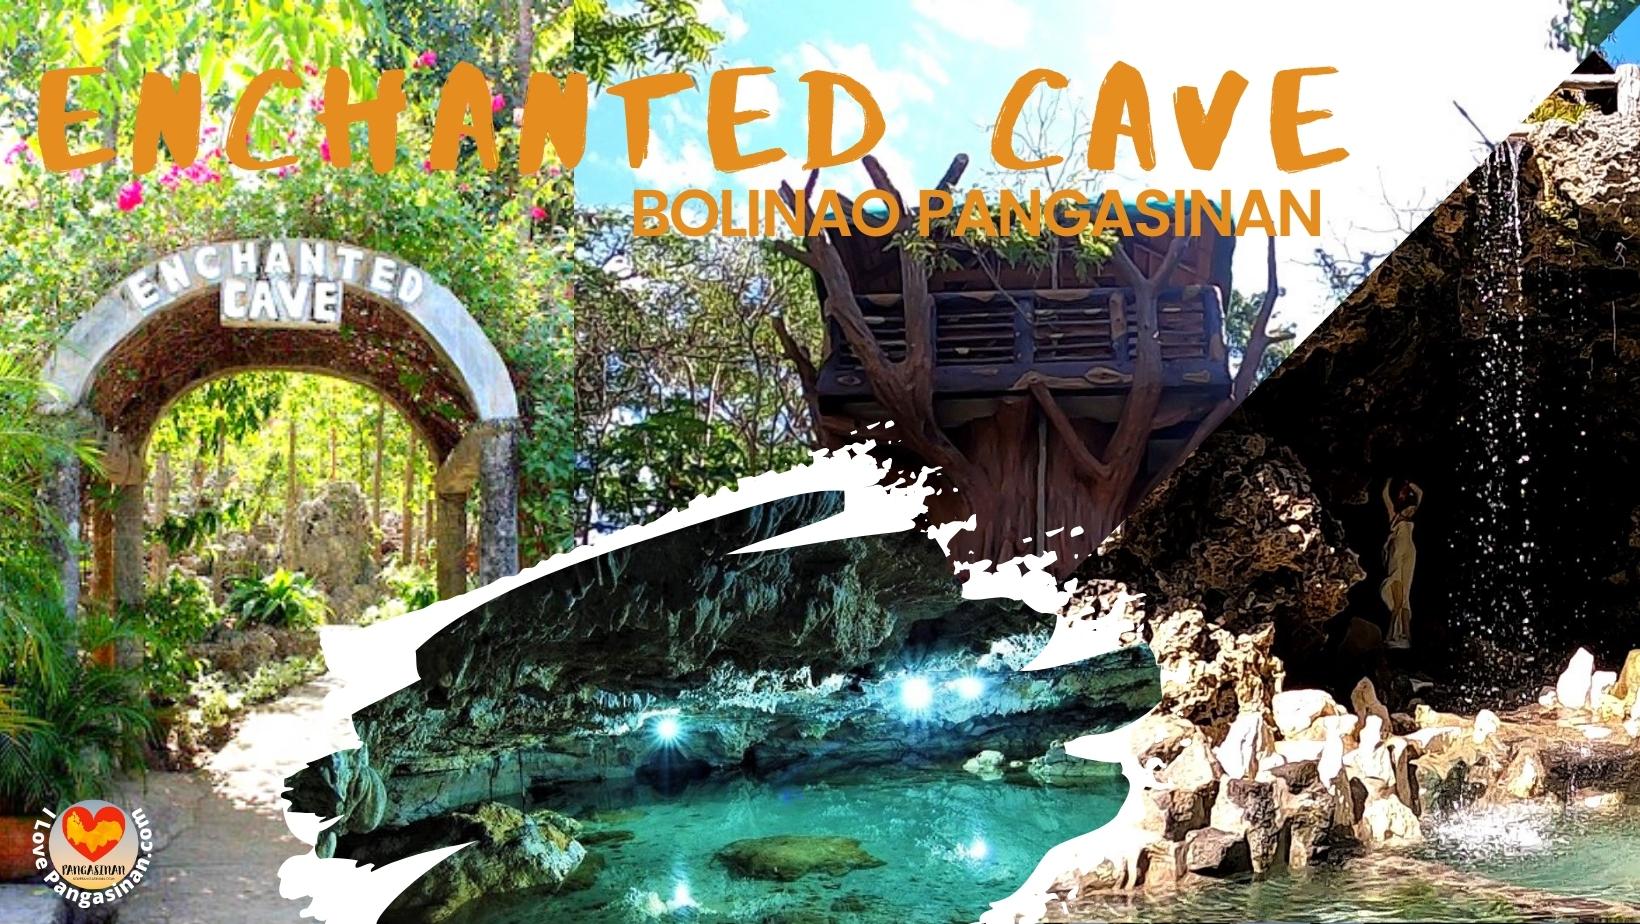 Enchanted Cave